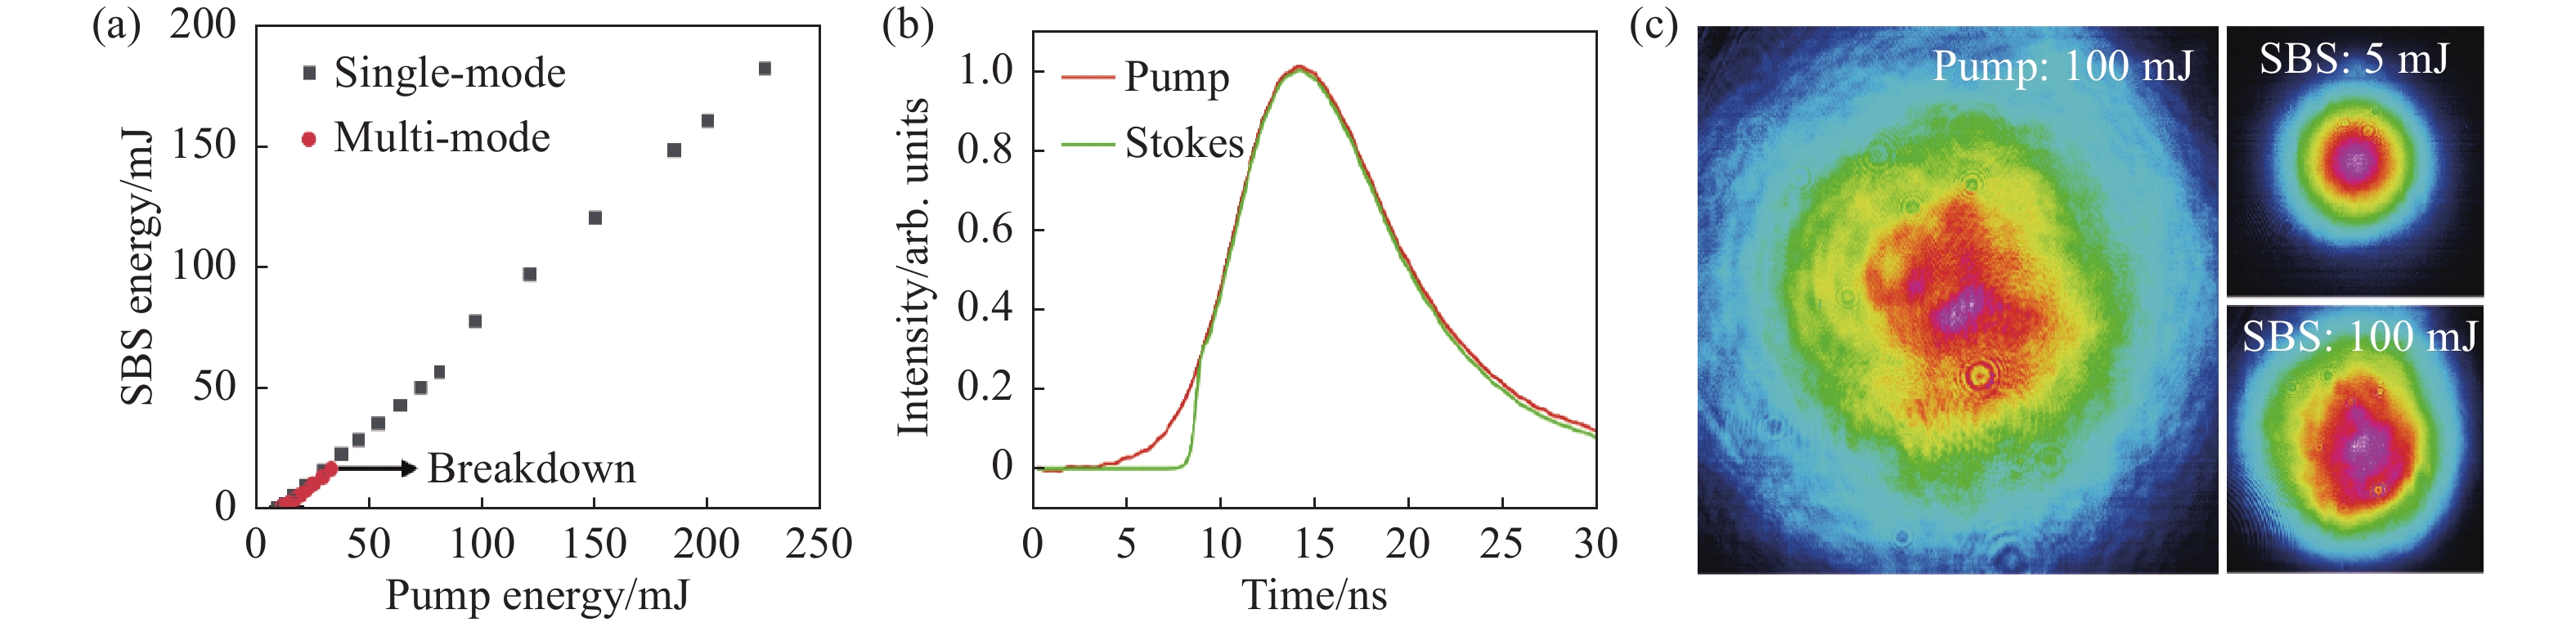 (a) Variation of SBS reflected energy with pump energy; (b) Waveforms of pump and Stokes at maximum pump energy; (c) Pump and SBS beam profiles at different energies